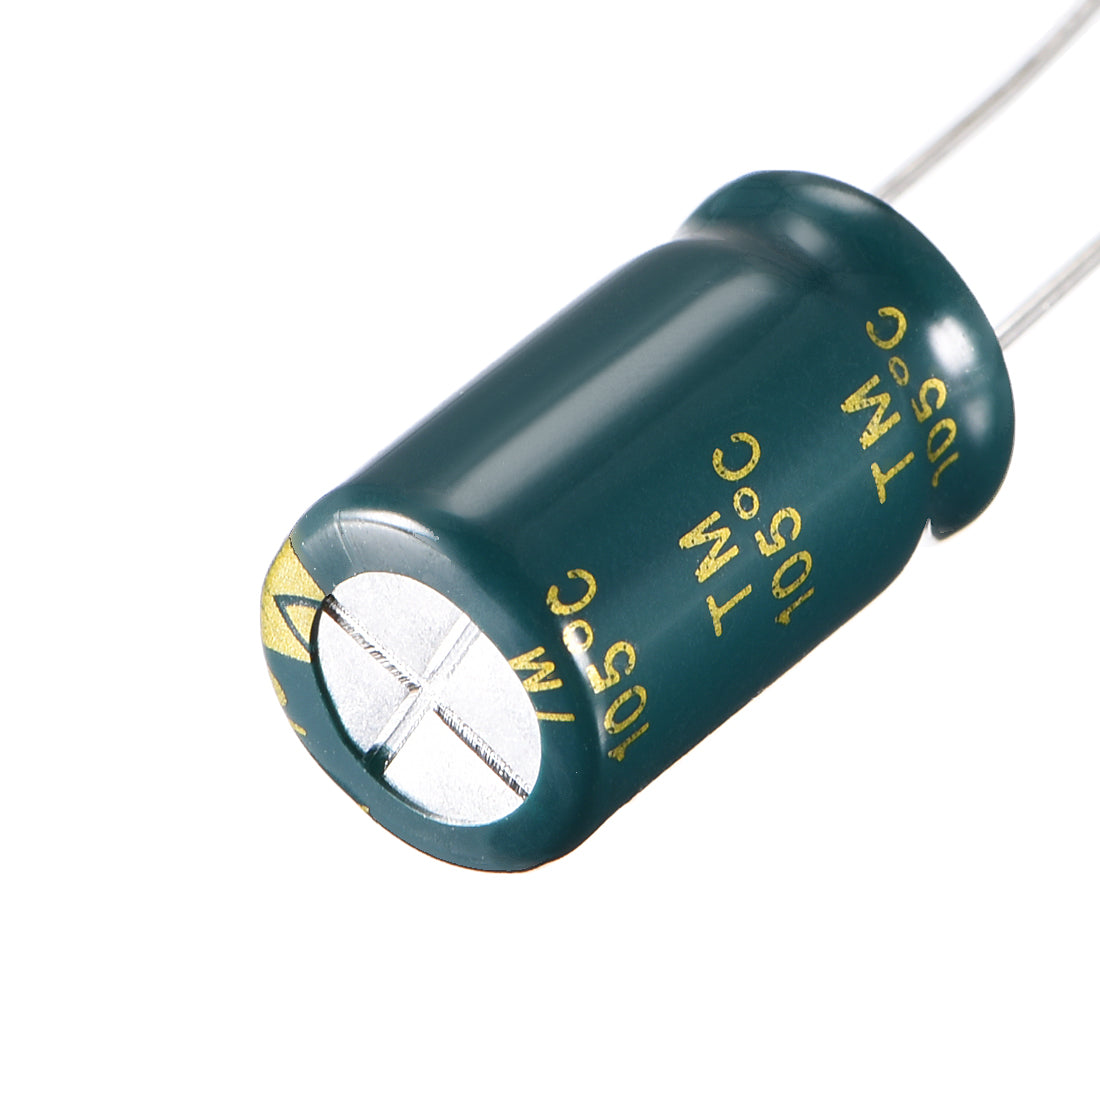 uxcell Uxcell Aluminum Radial Electrolytic Capacitor Low ESR Green with 1000UF 16V 105 Celsius Life 3000H 10 x 17 mm High Ripple Current,Low Impedance 35pcs